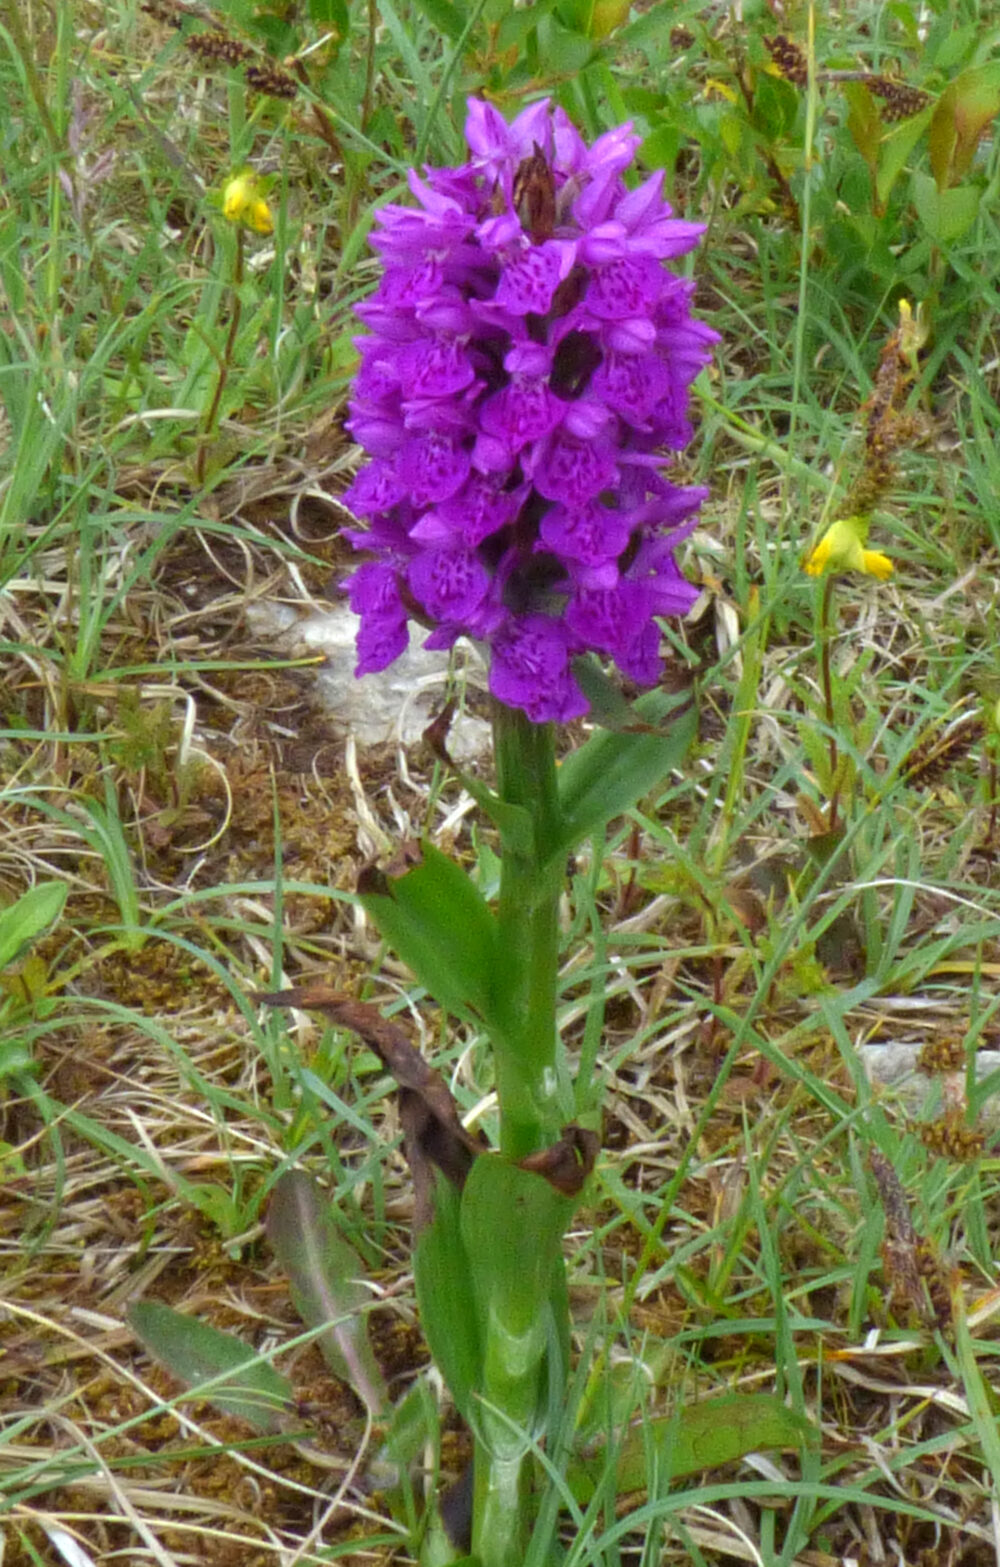 Northern Marsh Orchid, Ribblehead Quarry, 22nd June 2021